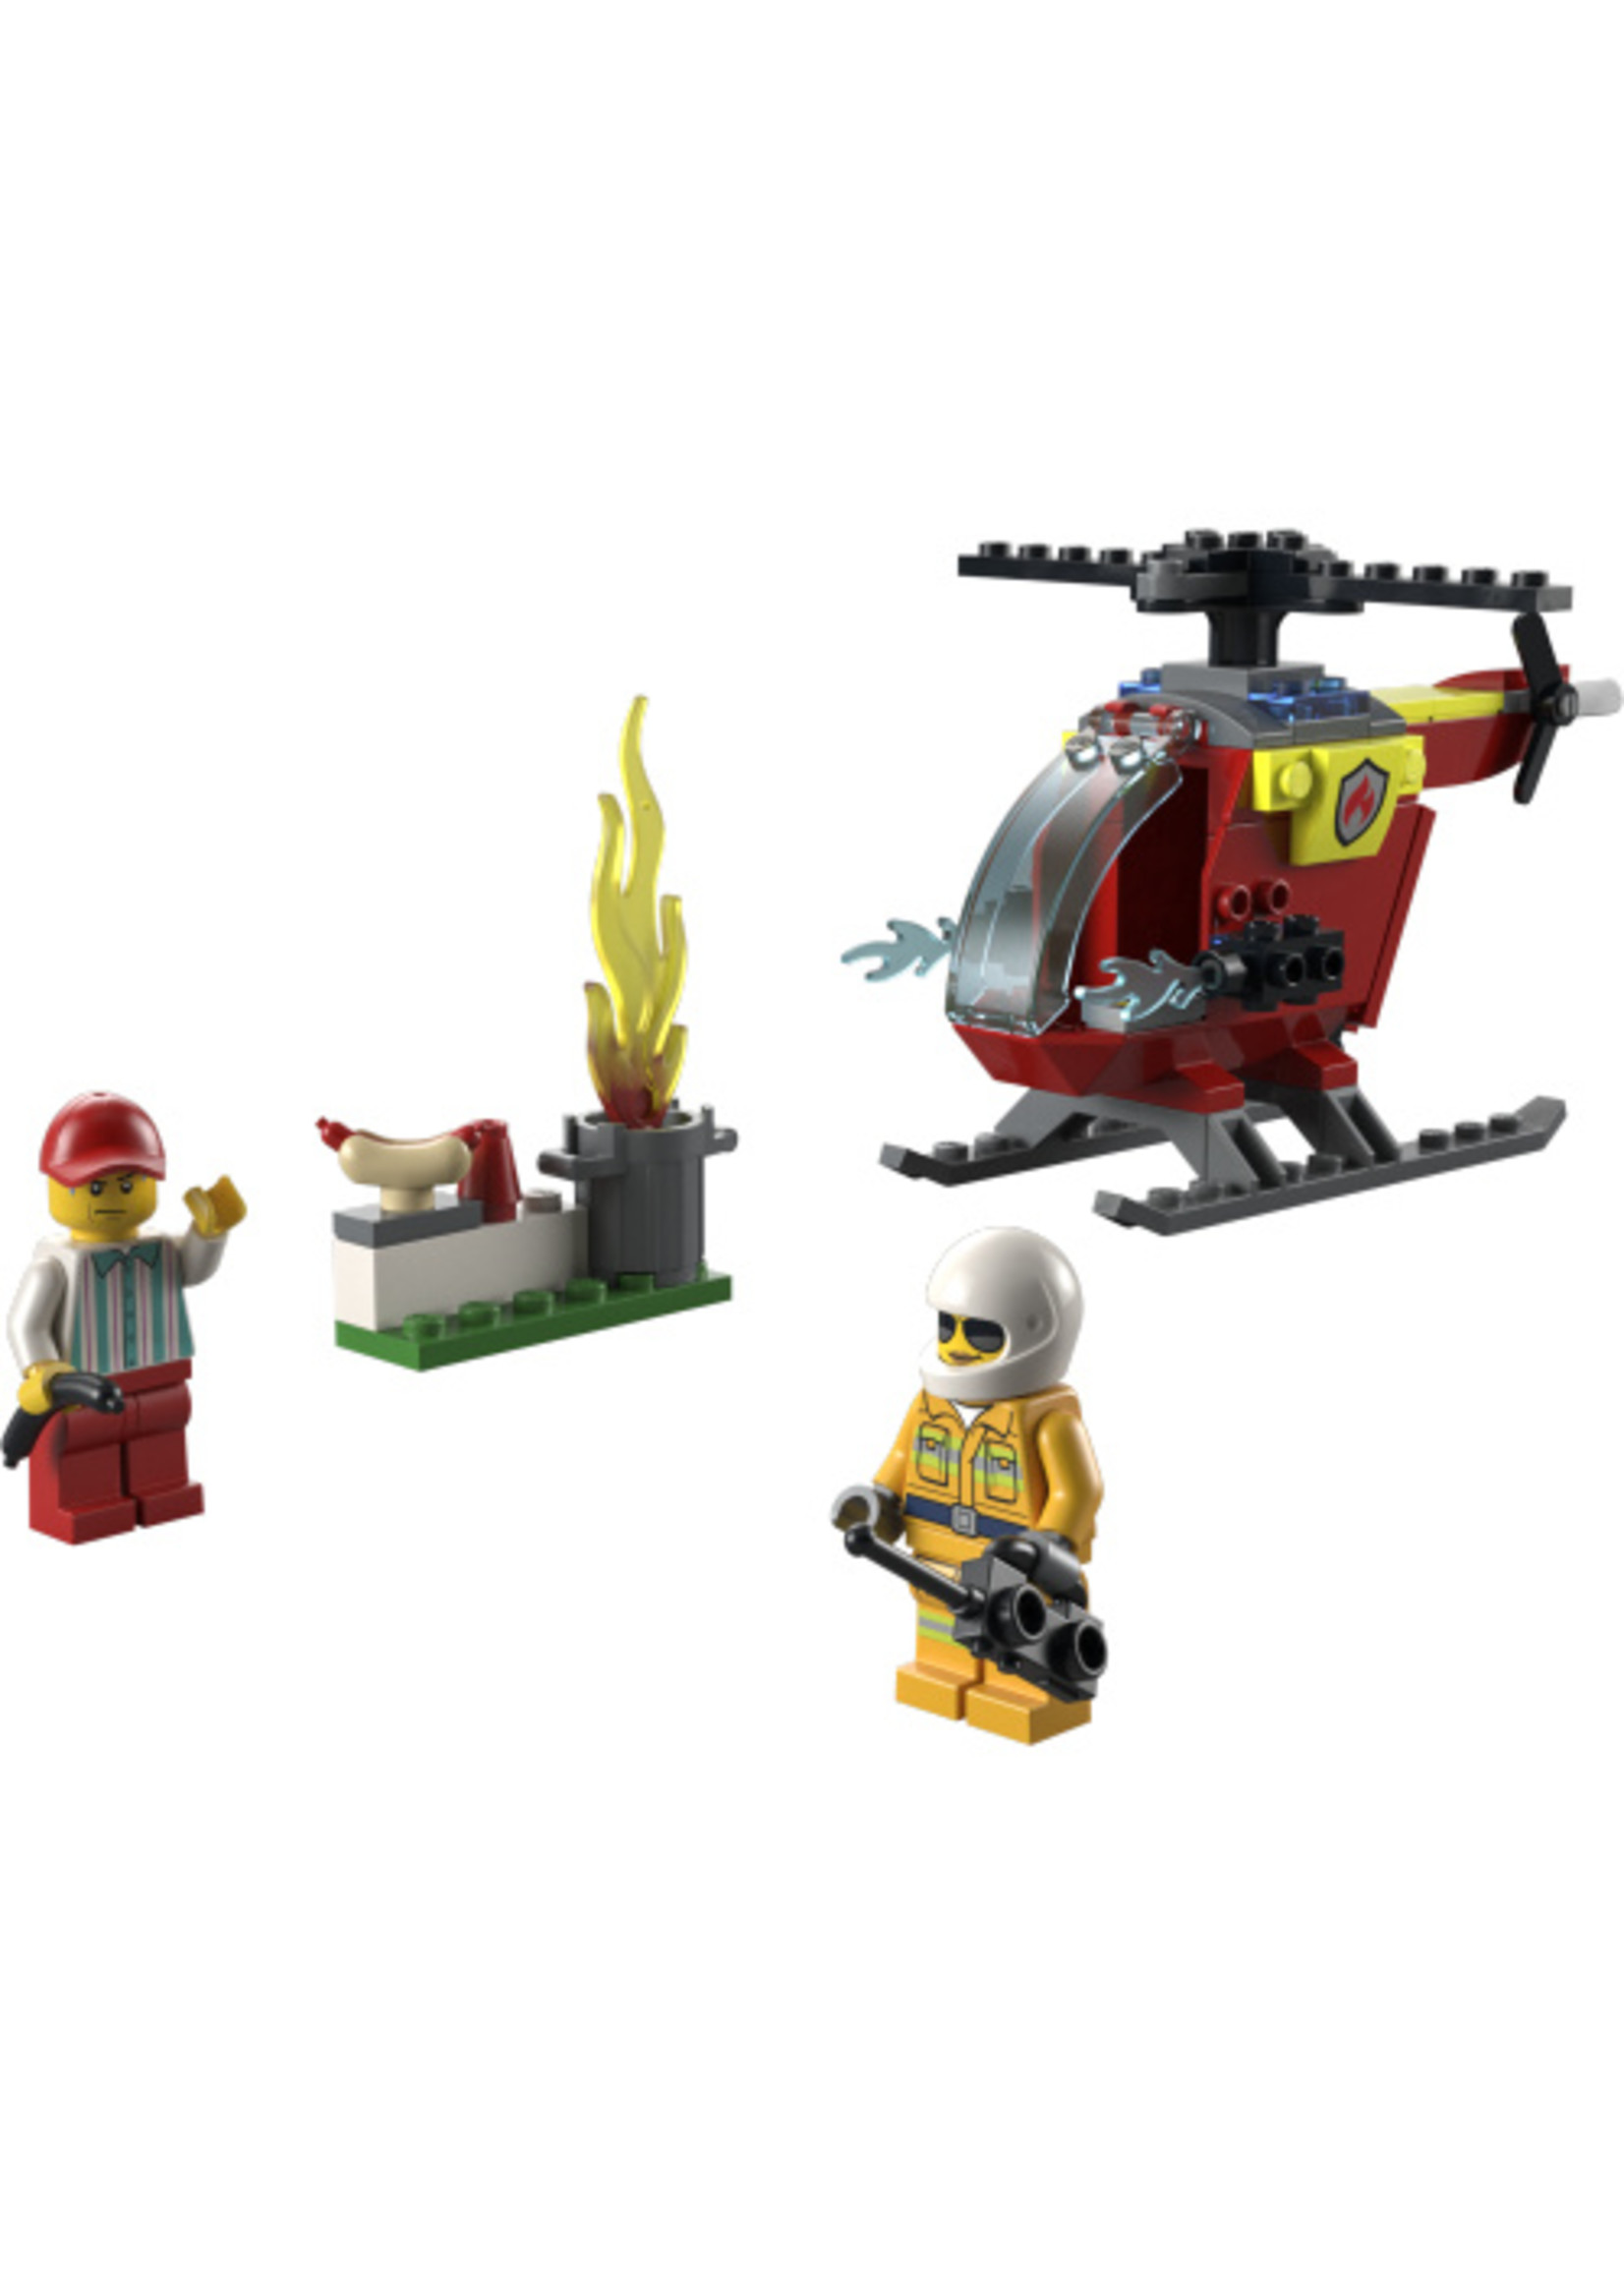 LEGO 60318 - Fire Helicopter